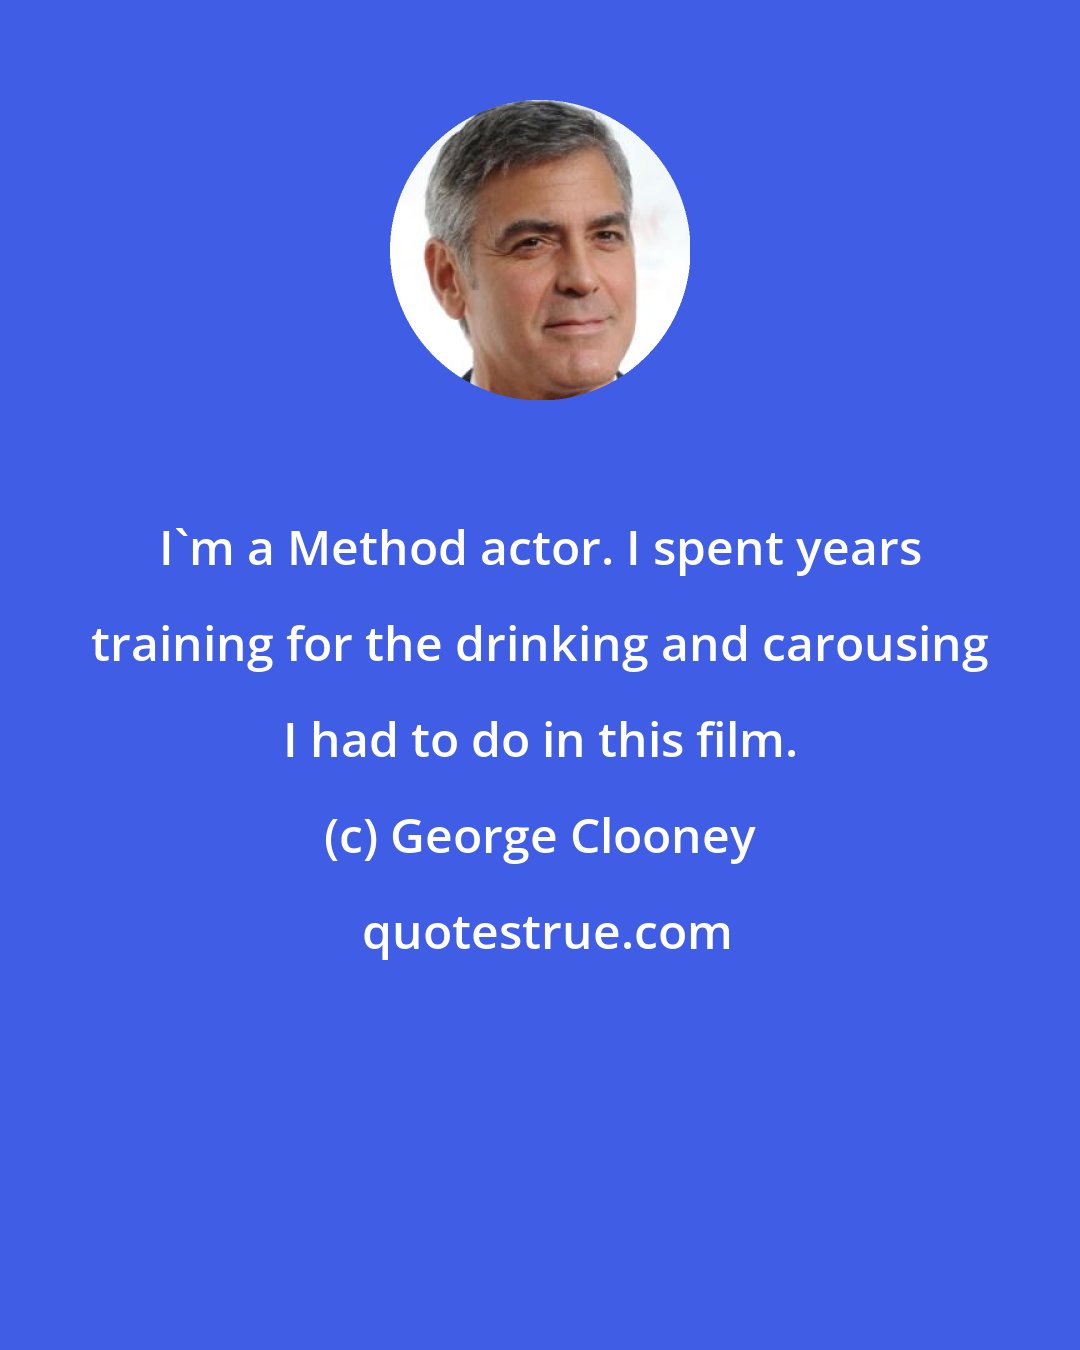 George Clooney: I'm a Method actor. I spent years training for the drinking and carousing I had to do in this film.